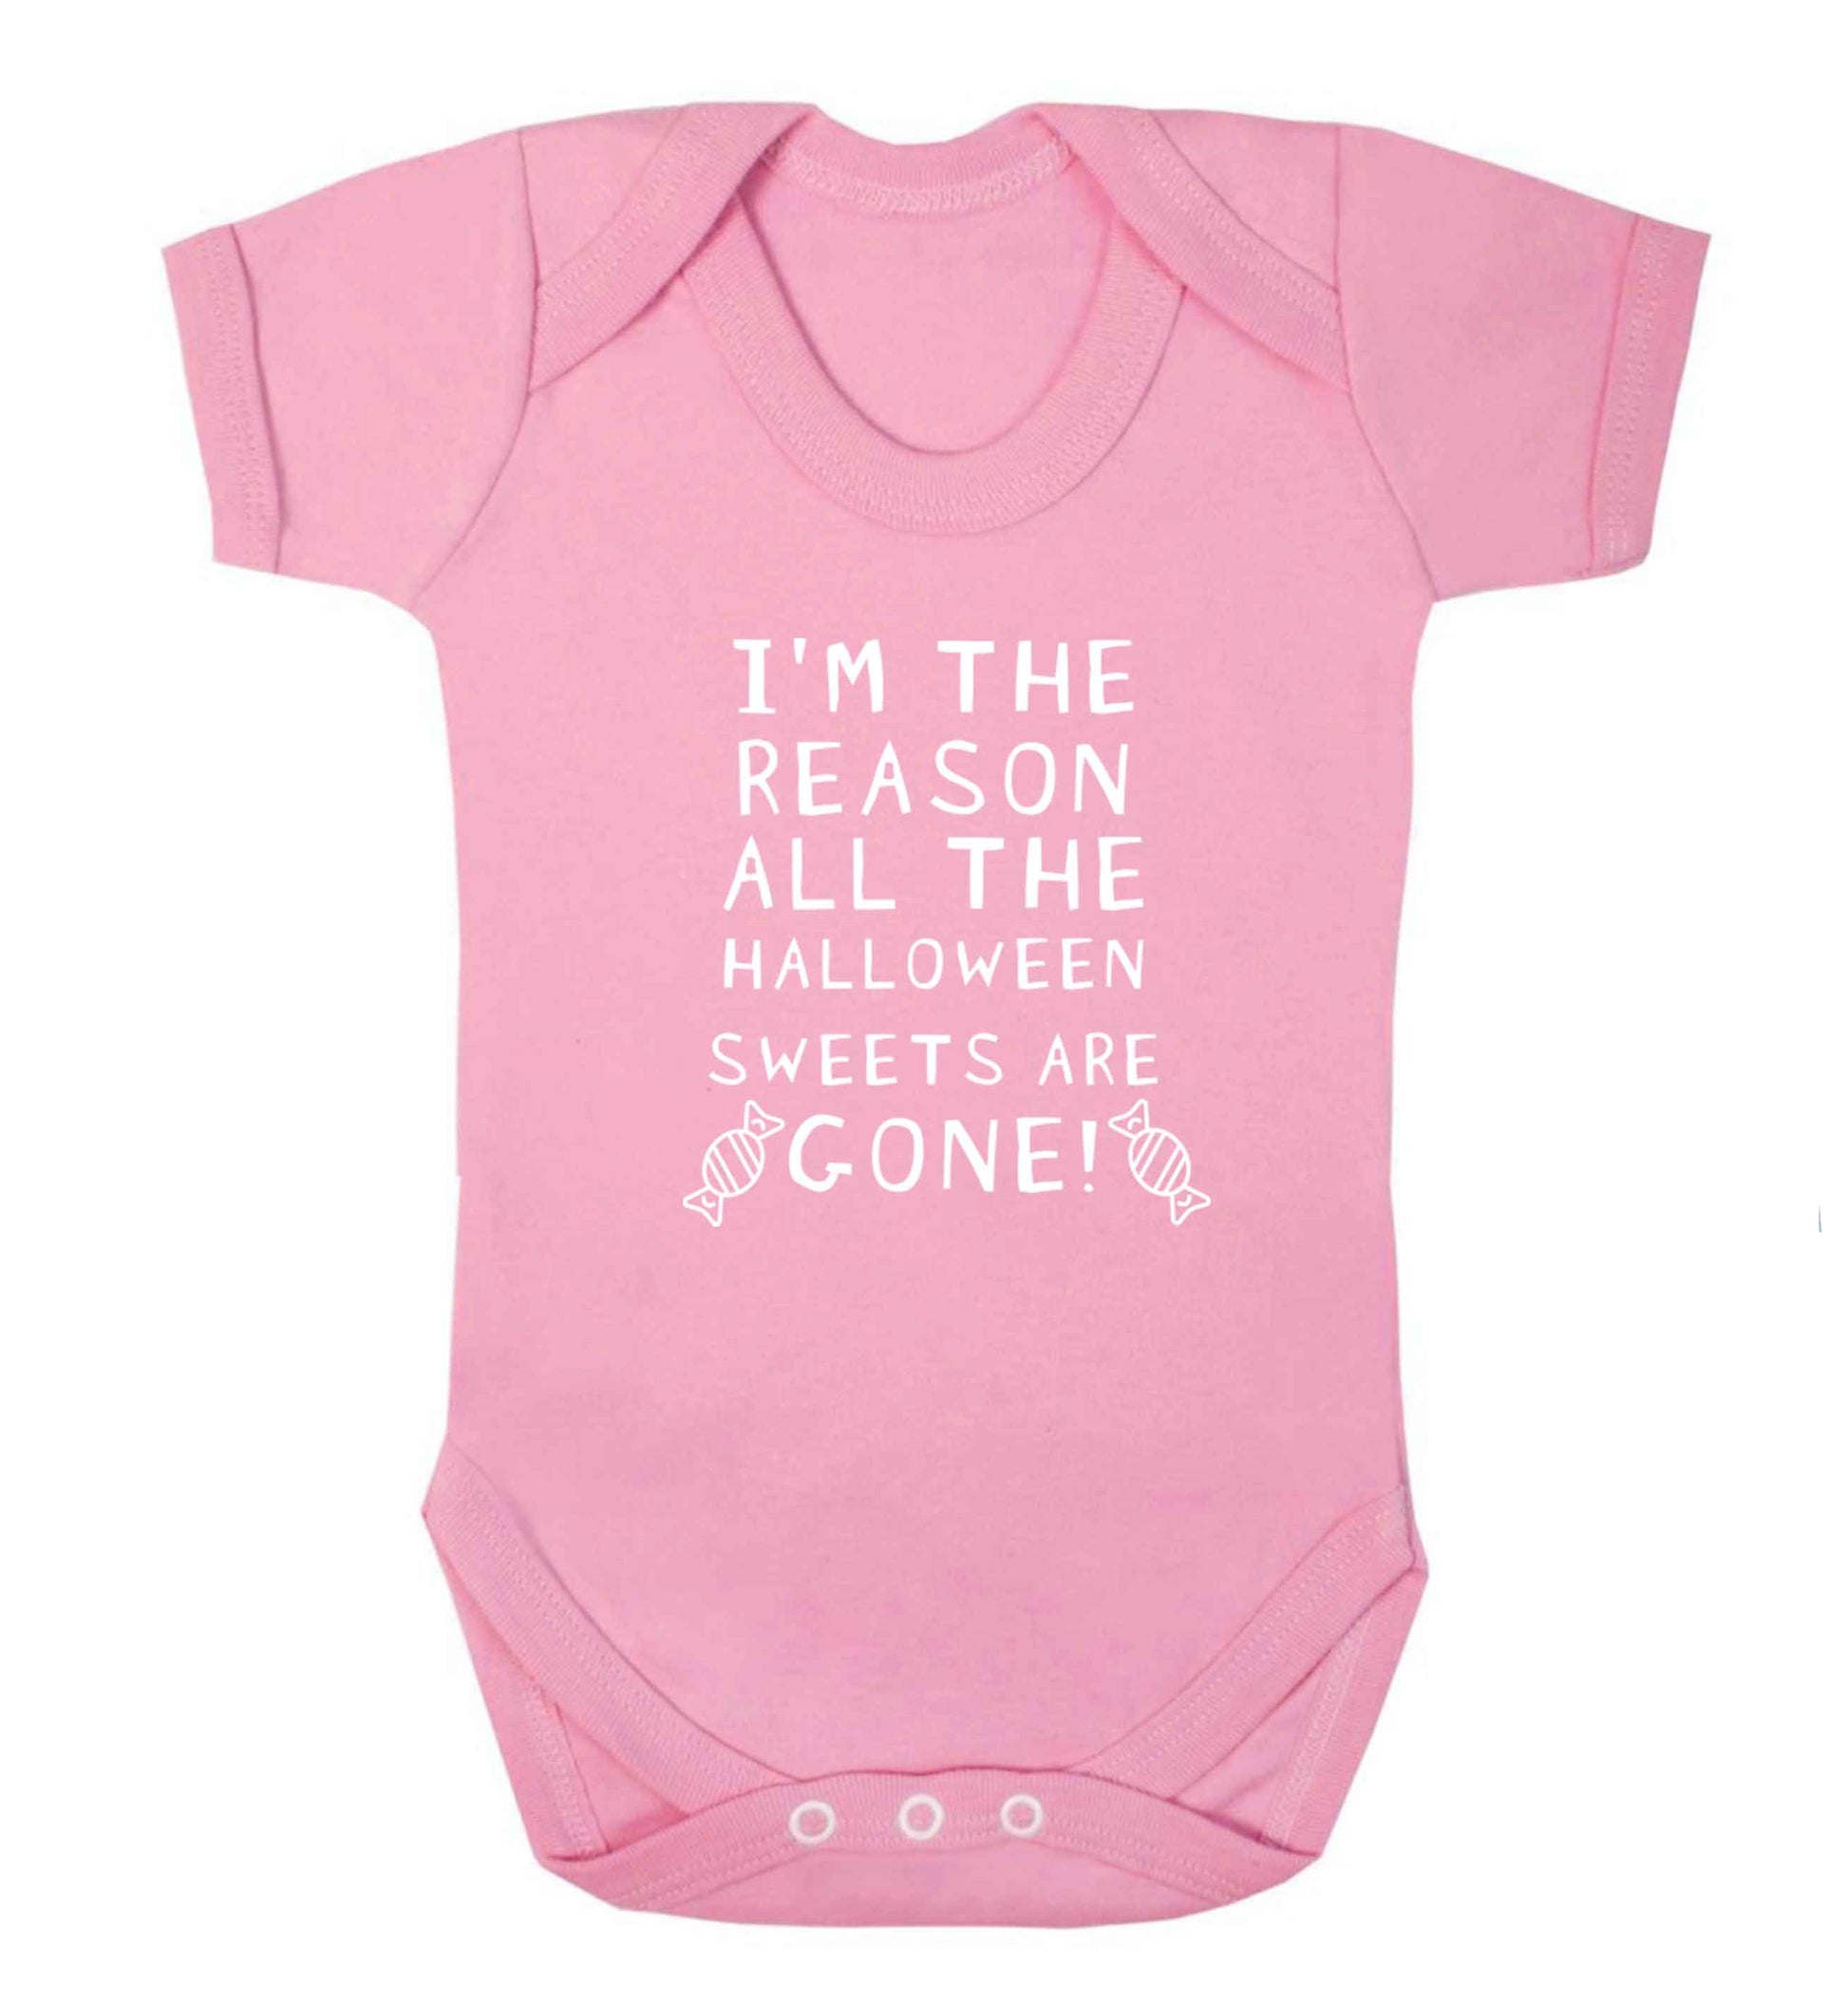 I'm the reason all of the halloween sweets are gone baby vest pale pink 18-24 months